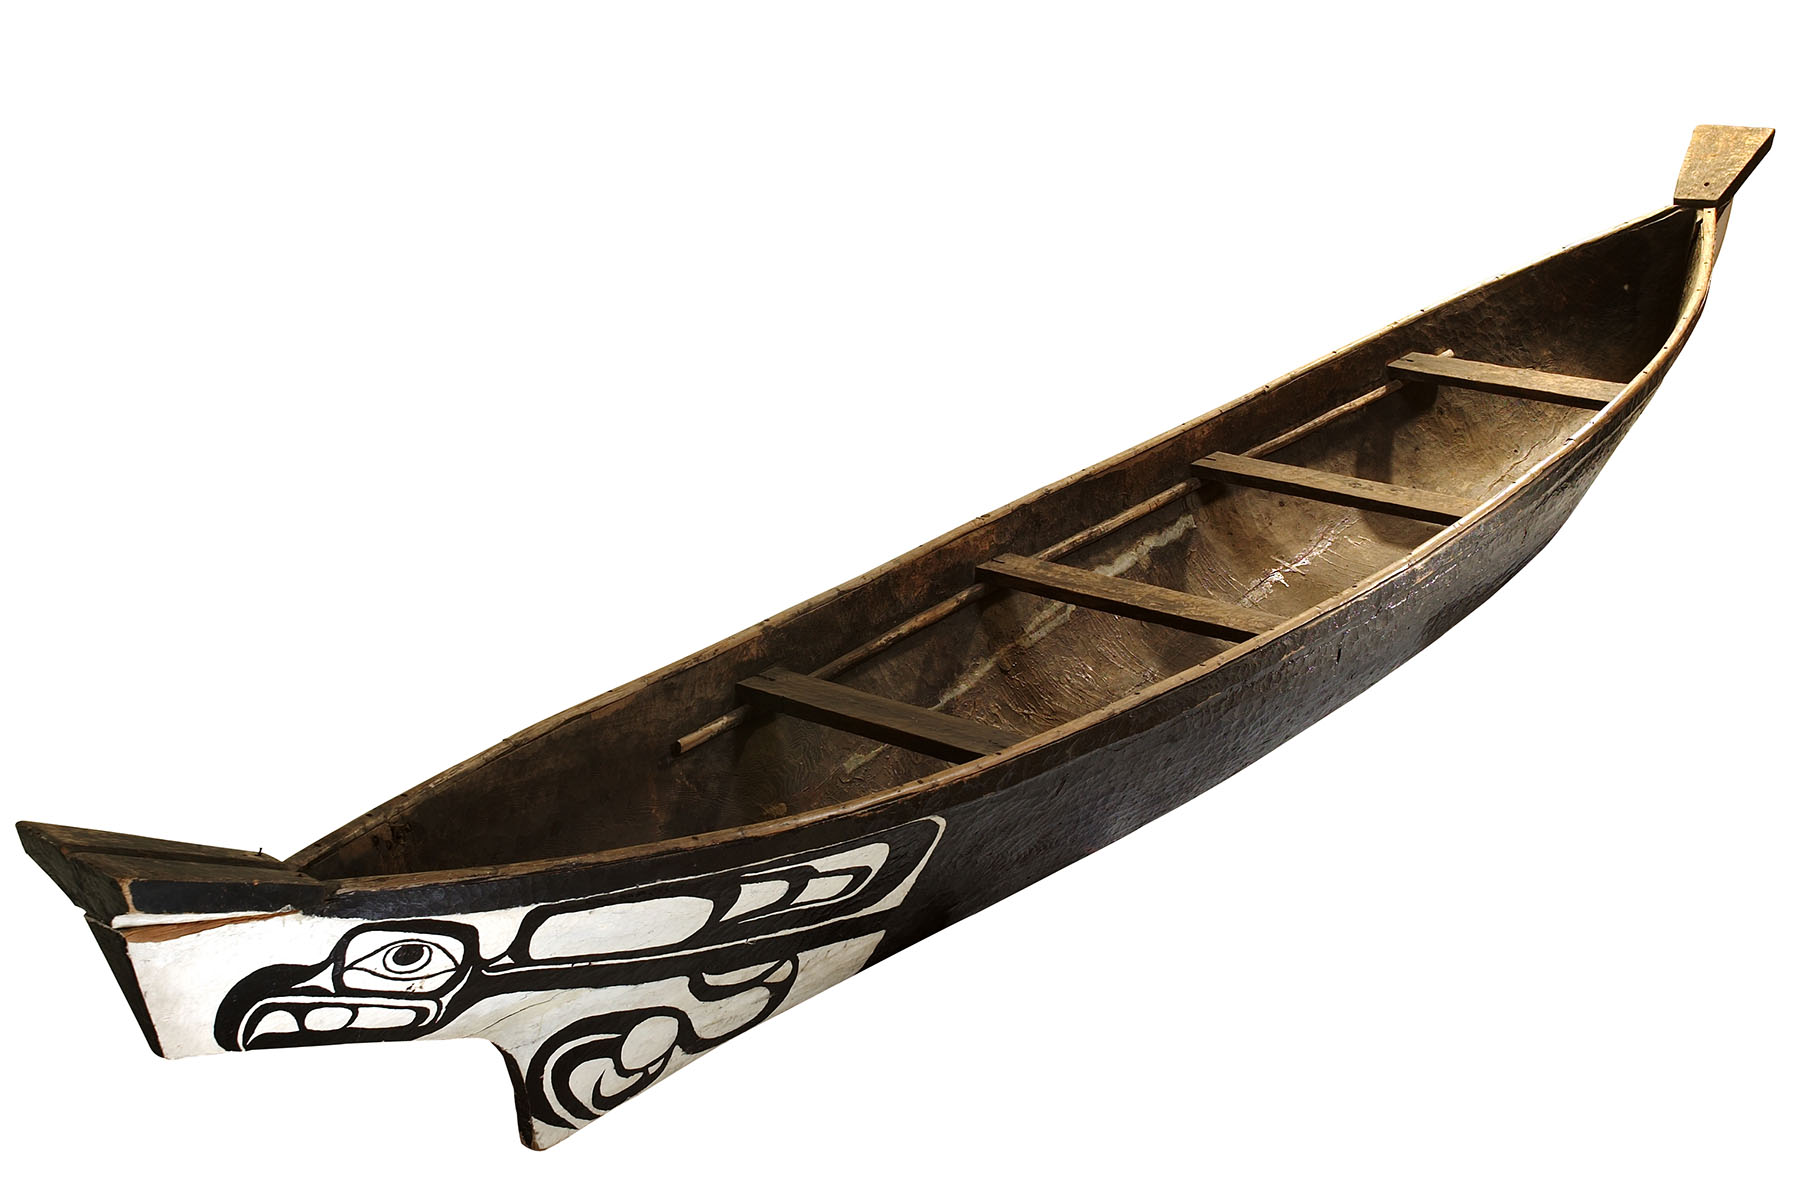 A Haida dugout, known as the Eagle canoe, commissioned by Kirk Wipper from builder Victor Adams. It features a black and white eagle on the bow.